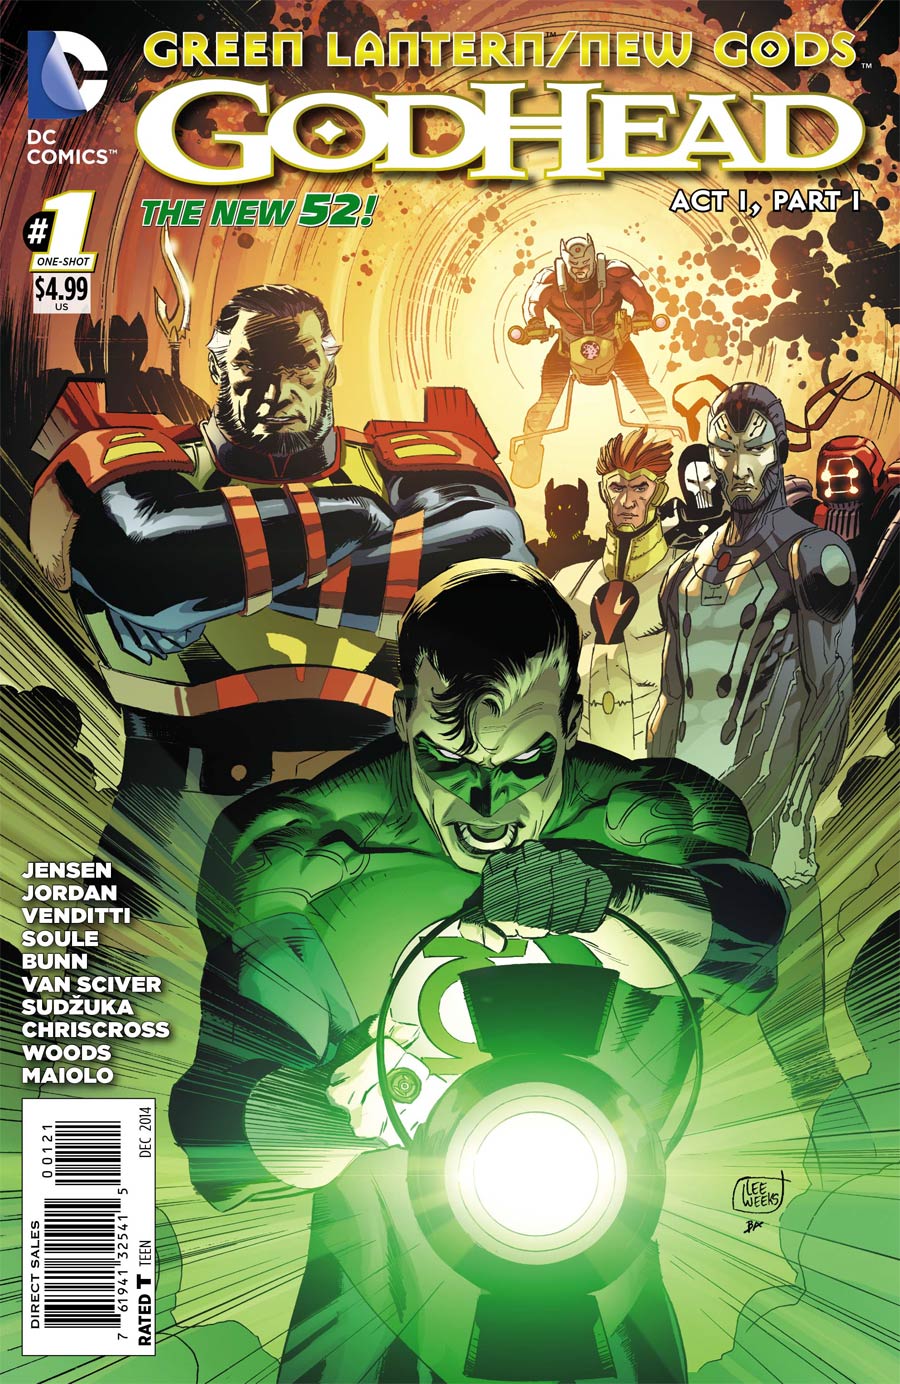 Green Lantern New Gods Godhead #1 Cover B Incentive Lee Weeks Variant Cover (Godhead Act 1 Part 1)